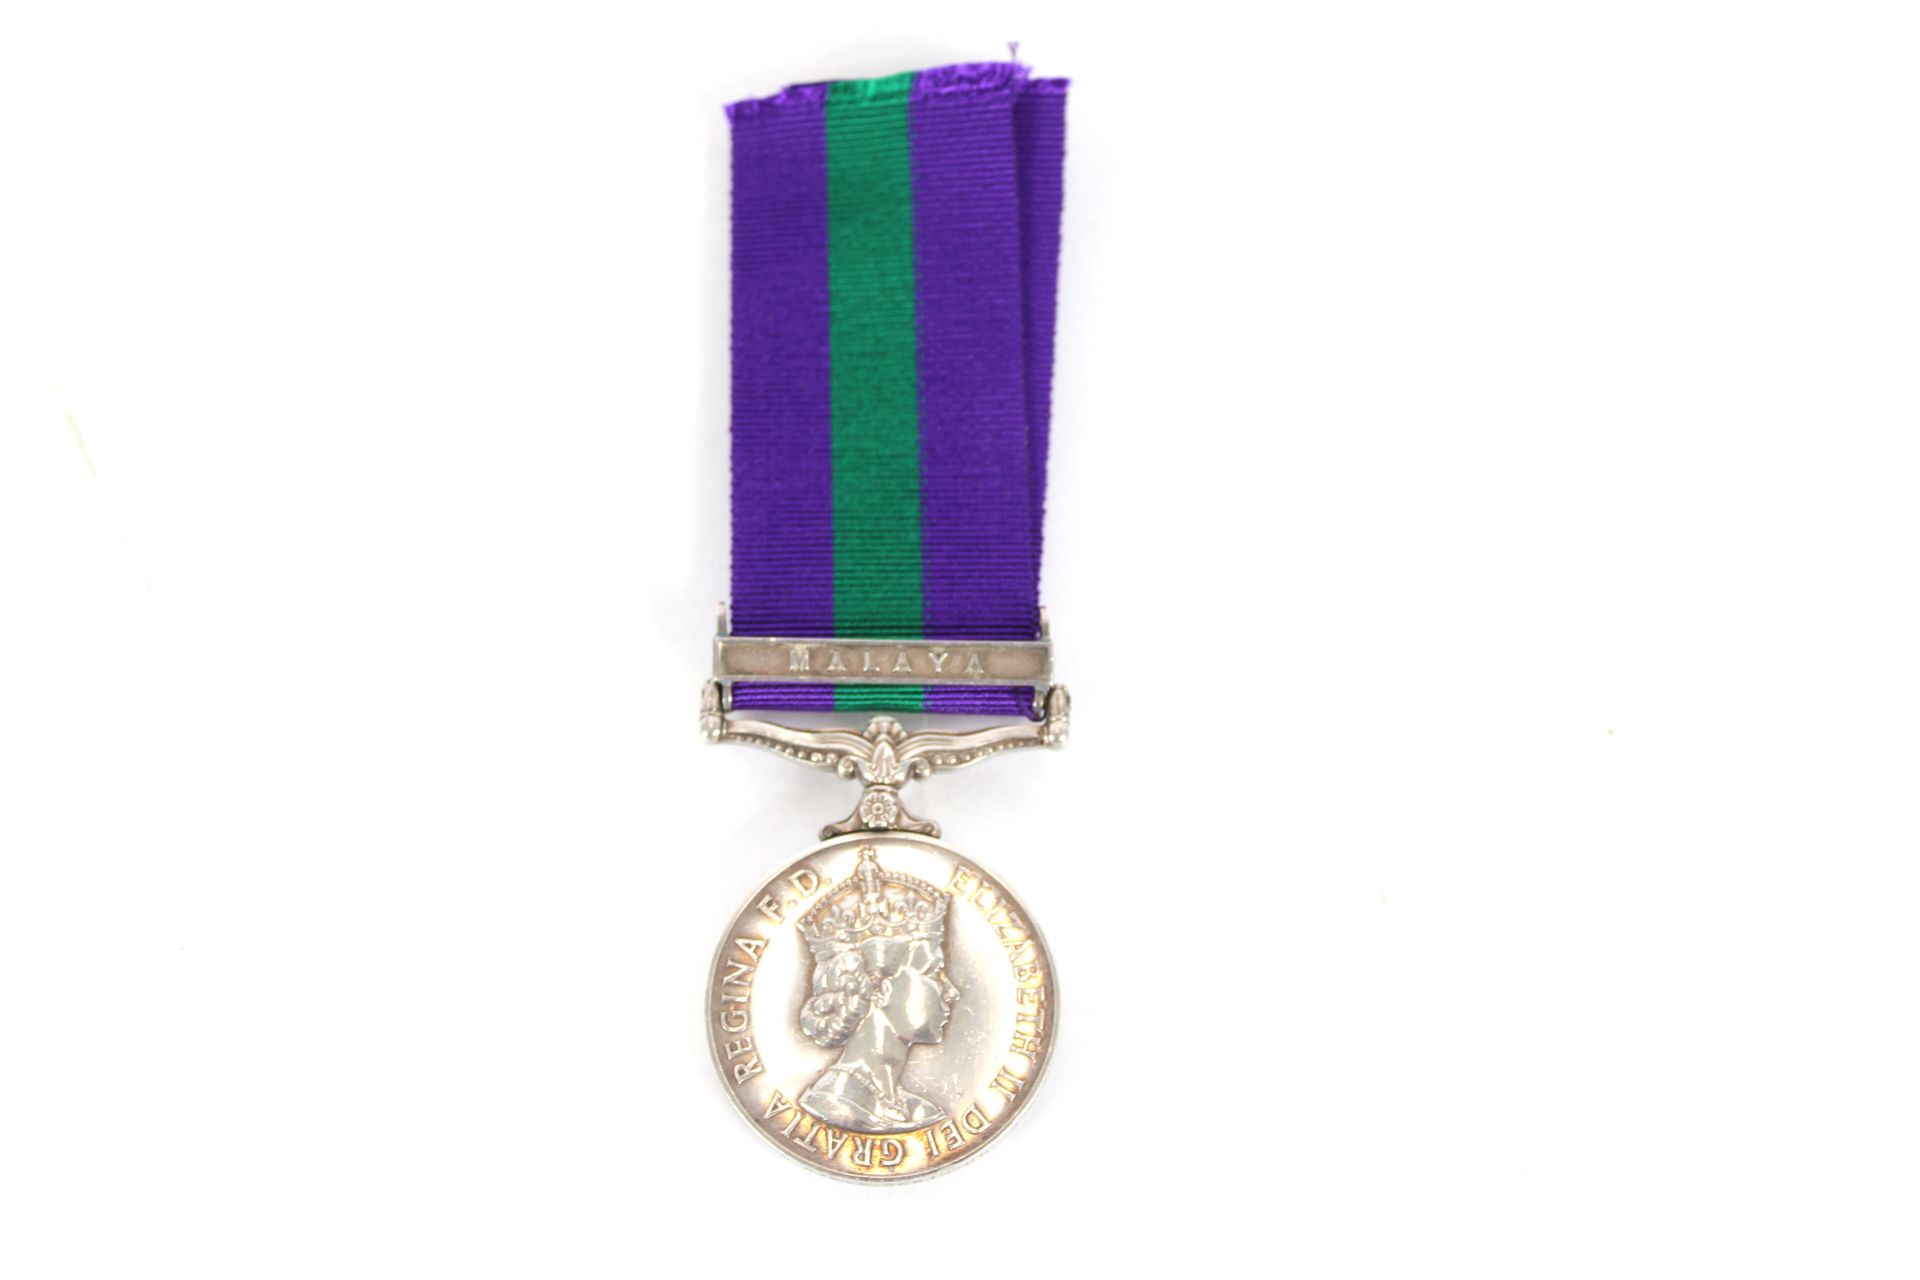 A QEII G.S.M. with Malaya clasp to 23661855 Pte. R